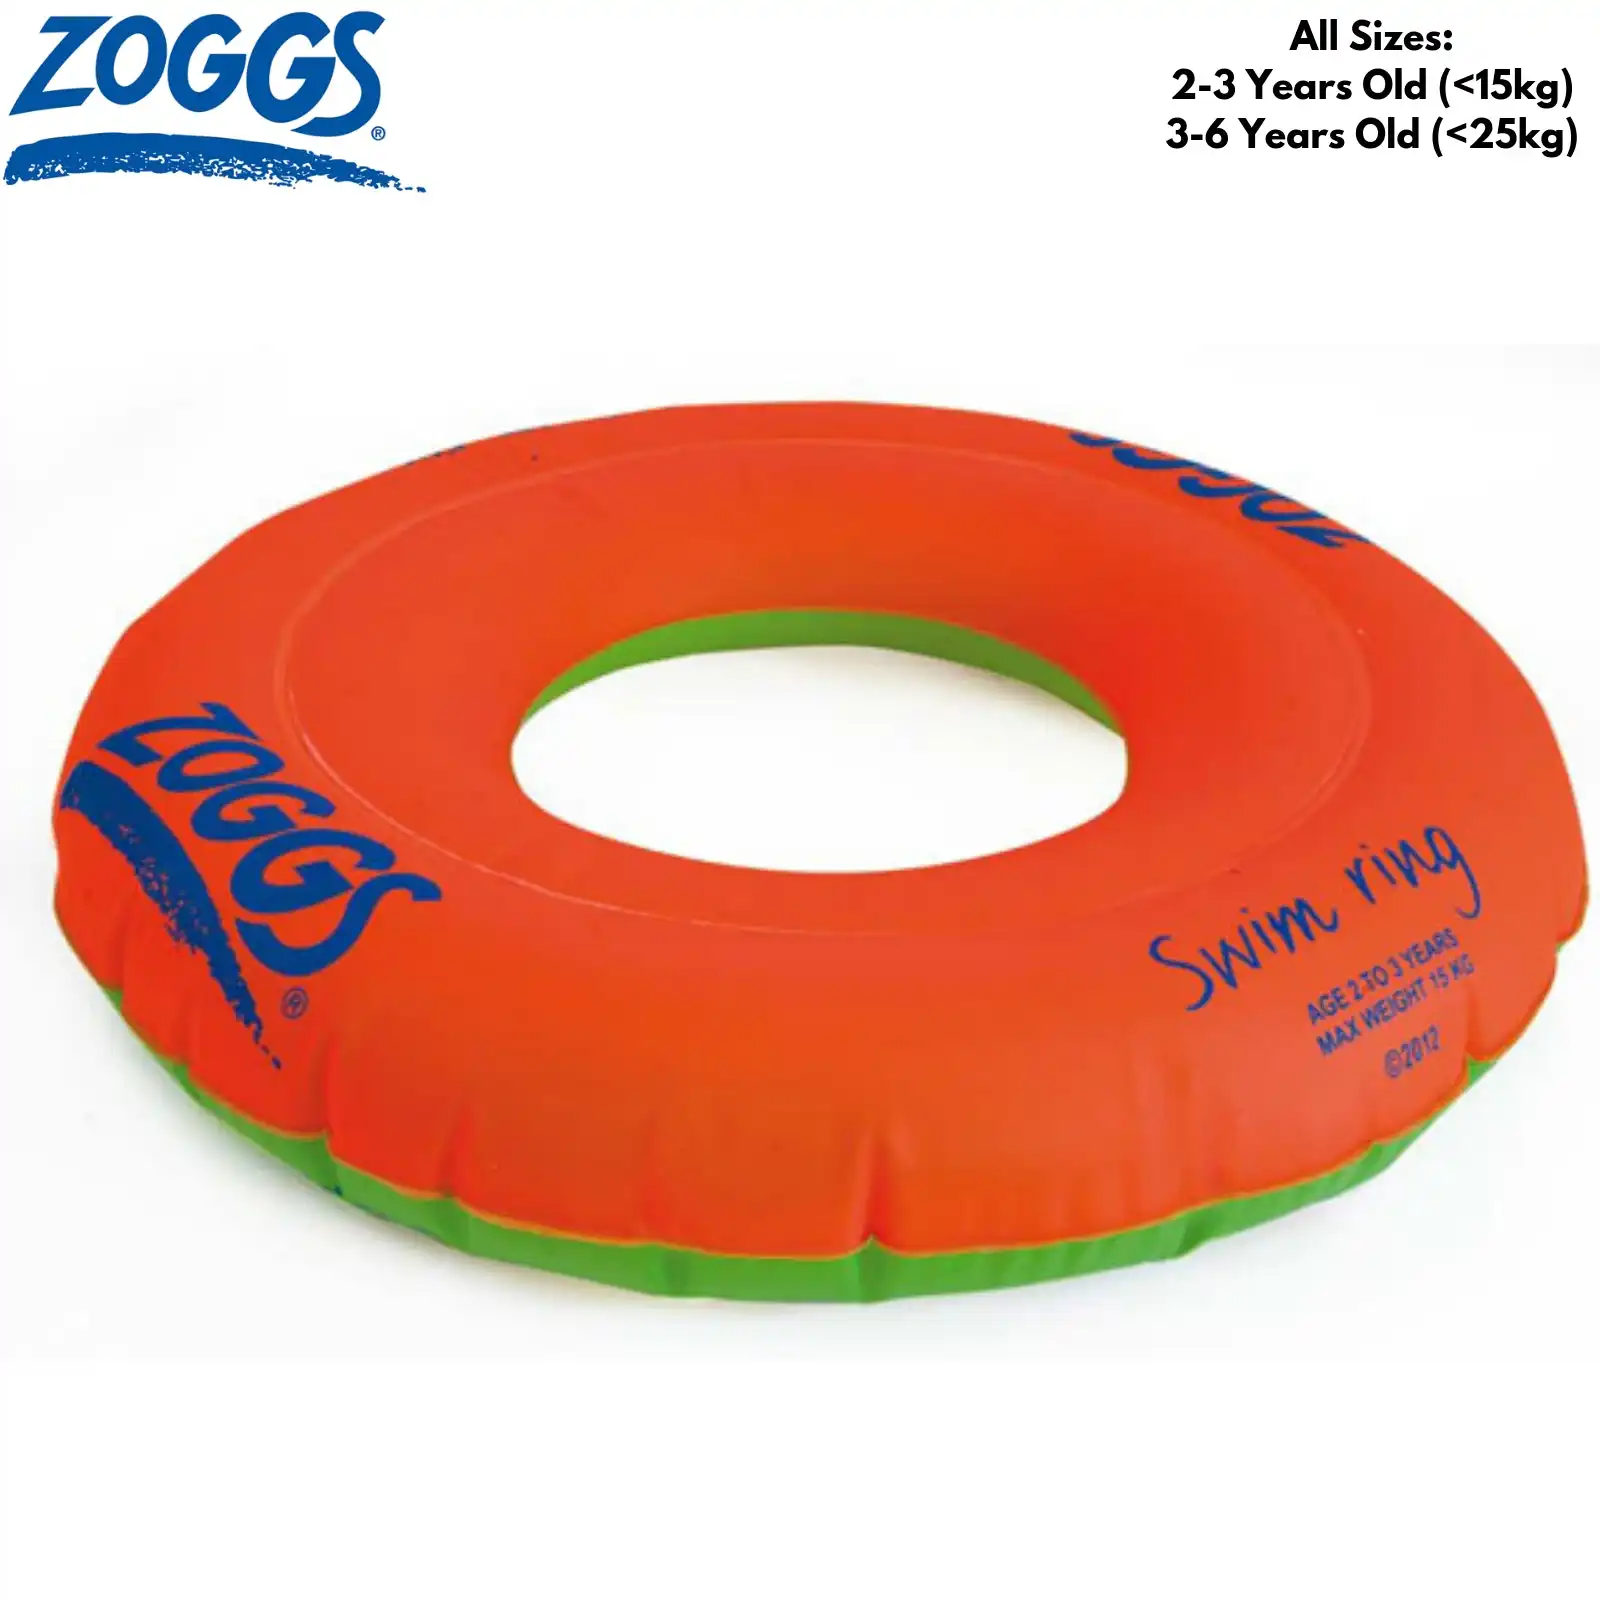 Zoggs Stage 2 Swim Ring Children's Swimming Floatie Zoggy Kids Learn Training Inflatable